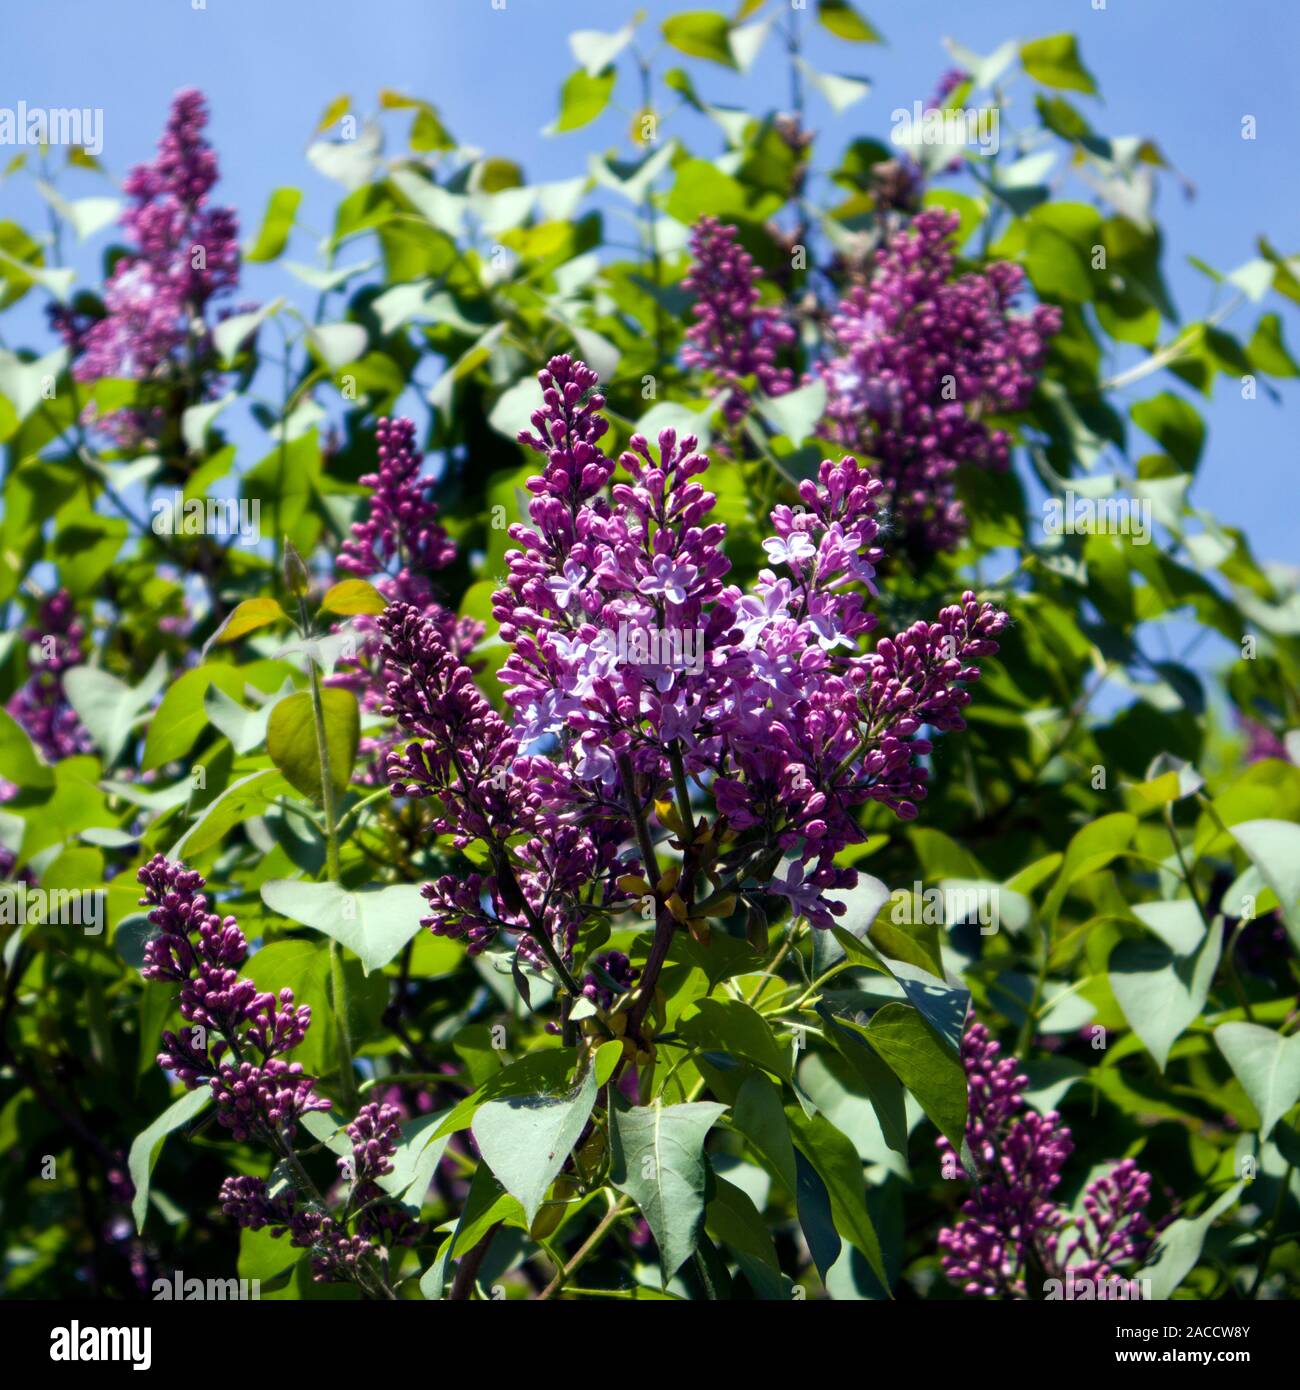 Young spring lilac bush, fresh balmy inflorescences with buds between the foliage Stock Photo